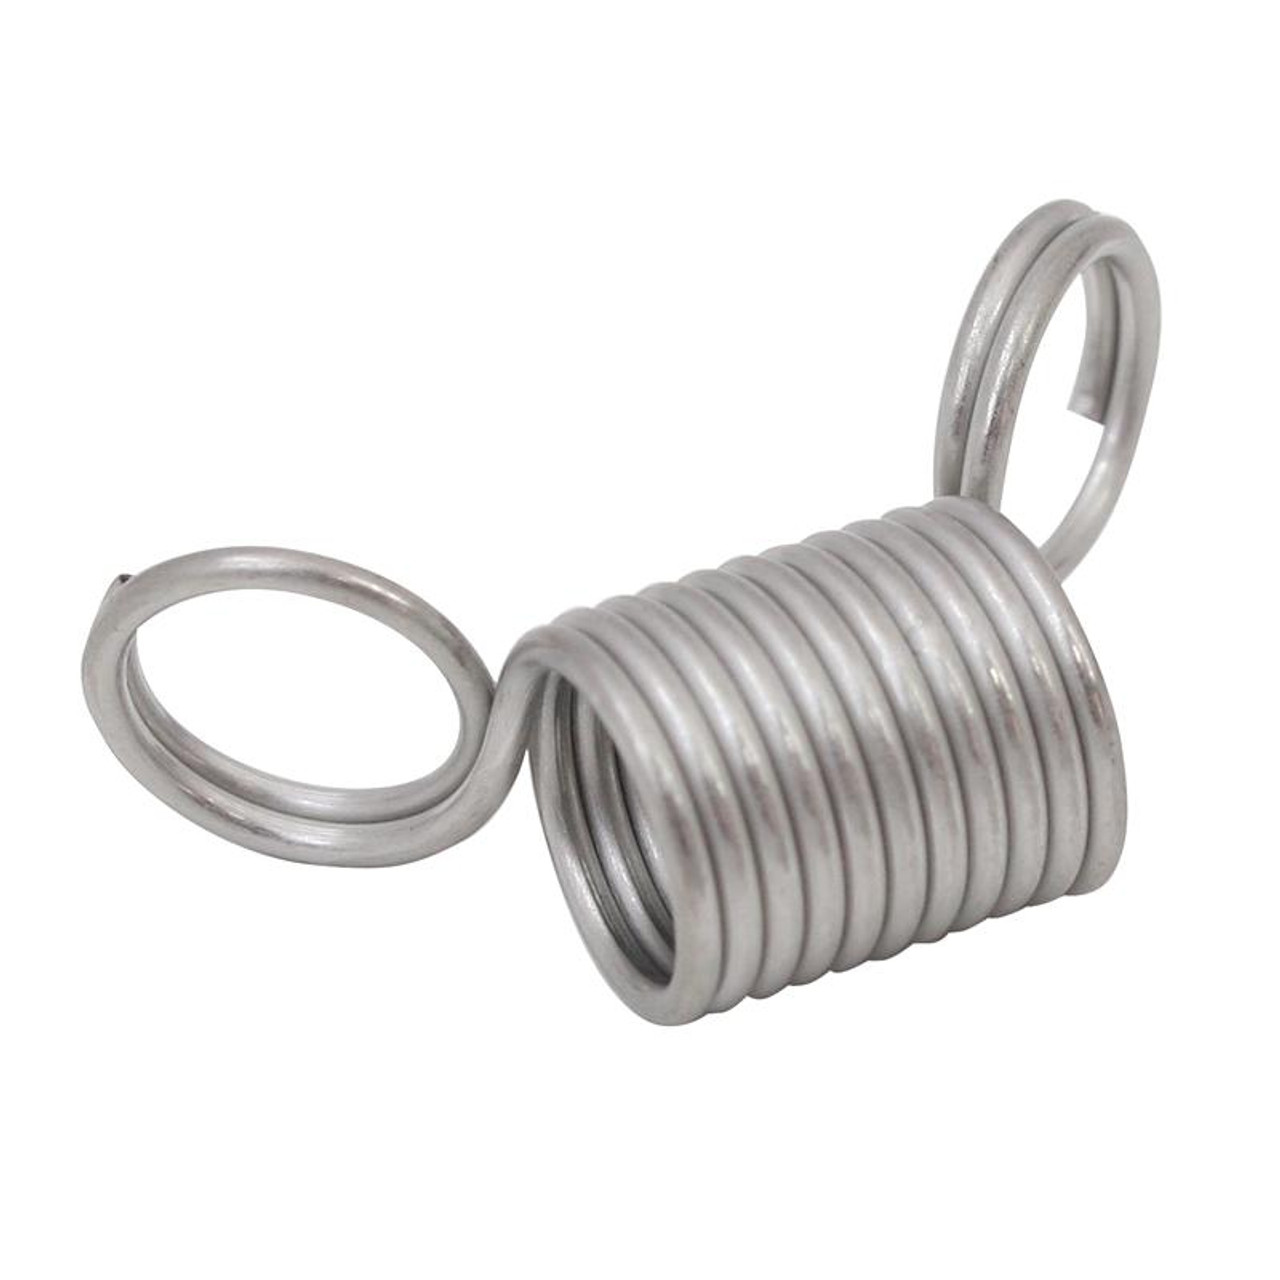 ESSENTIAL BEAD STOPPER Set Stainless Steel Spring Cord Ends